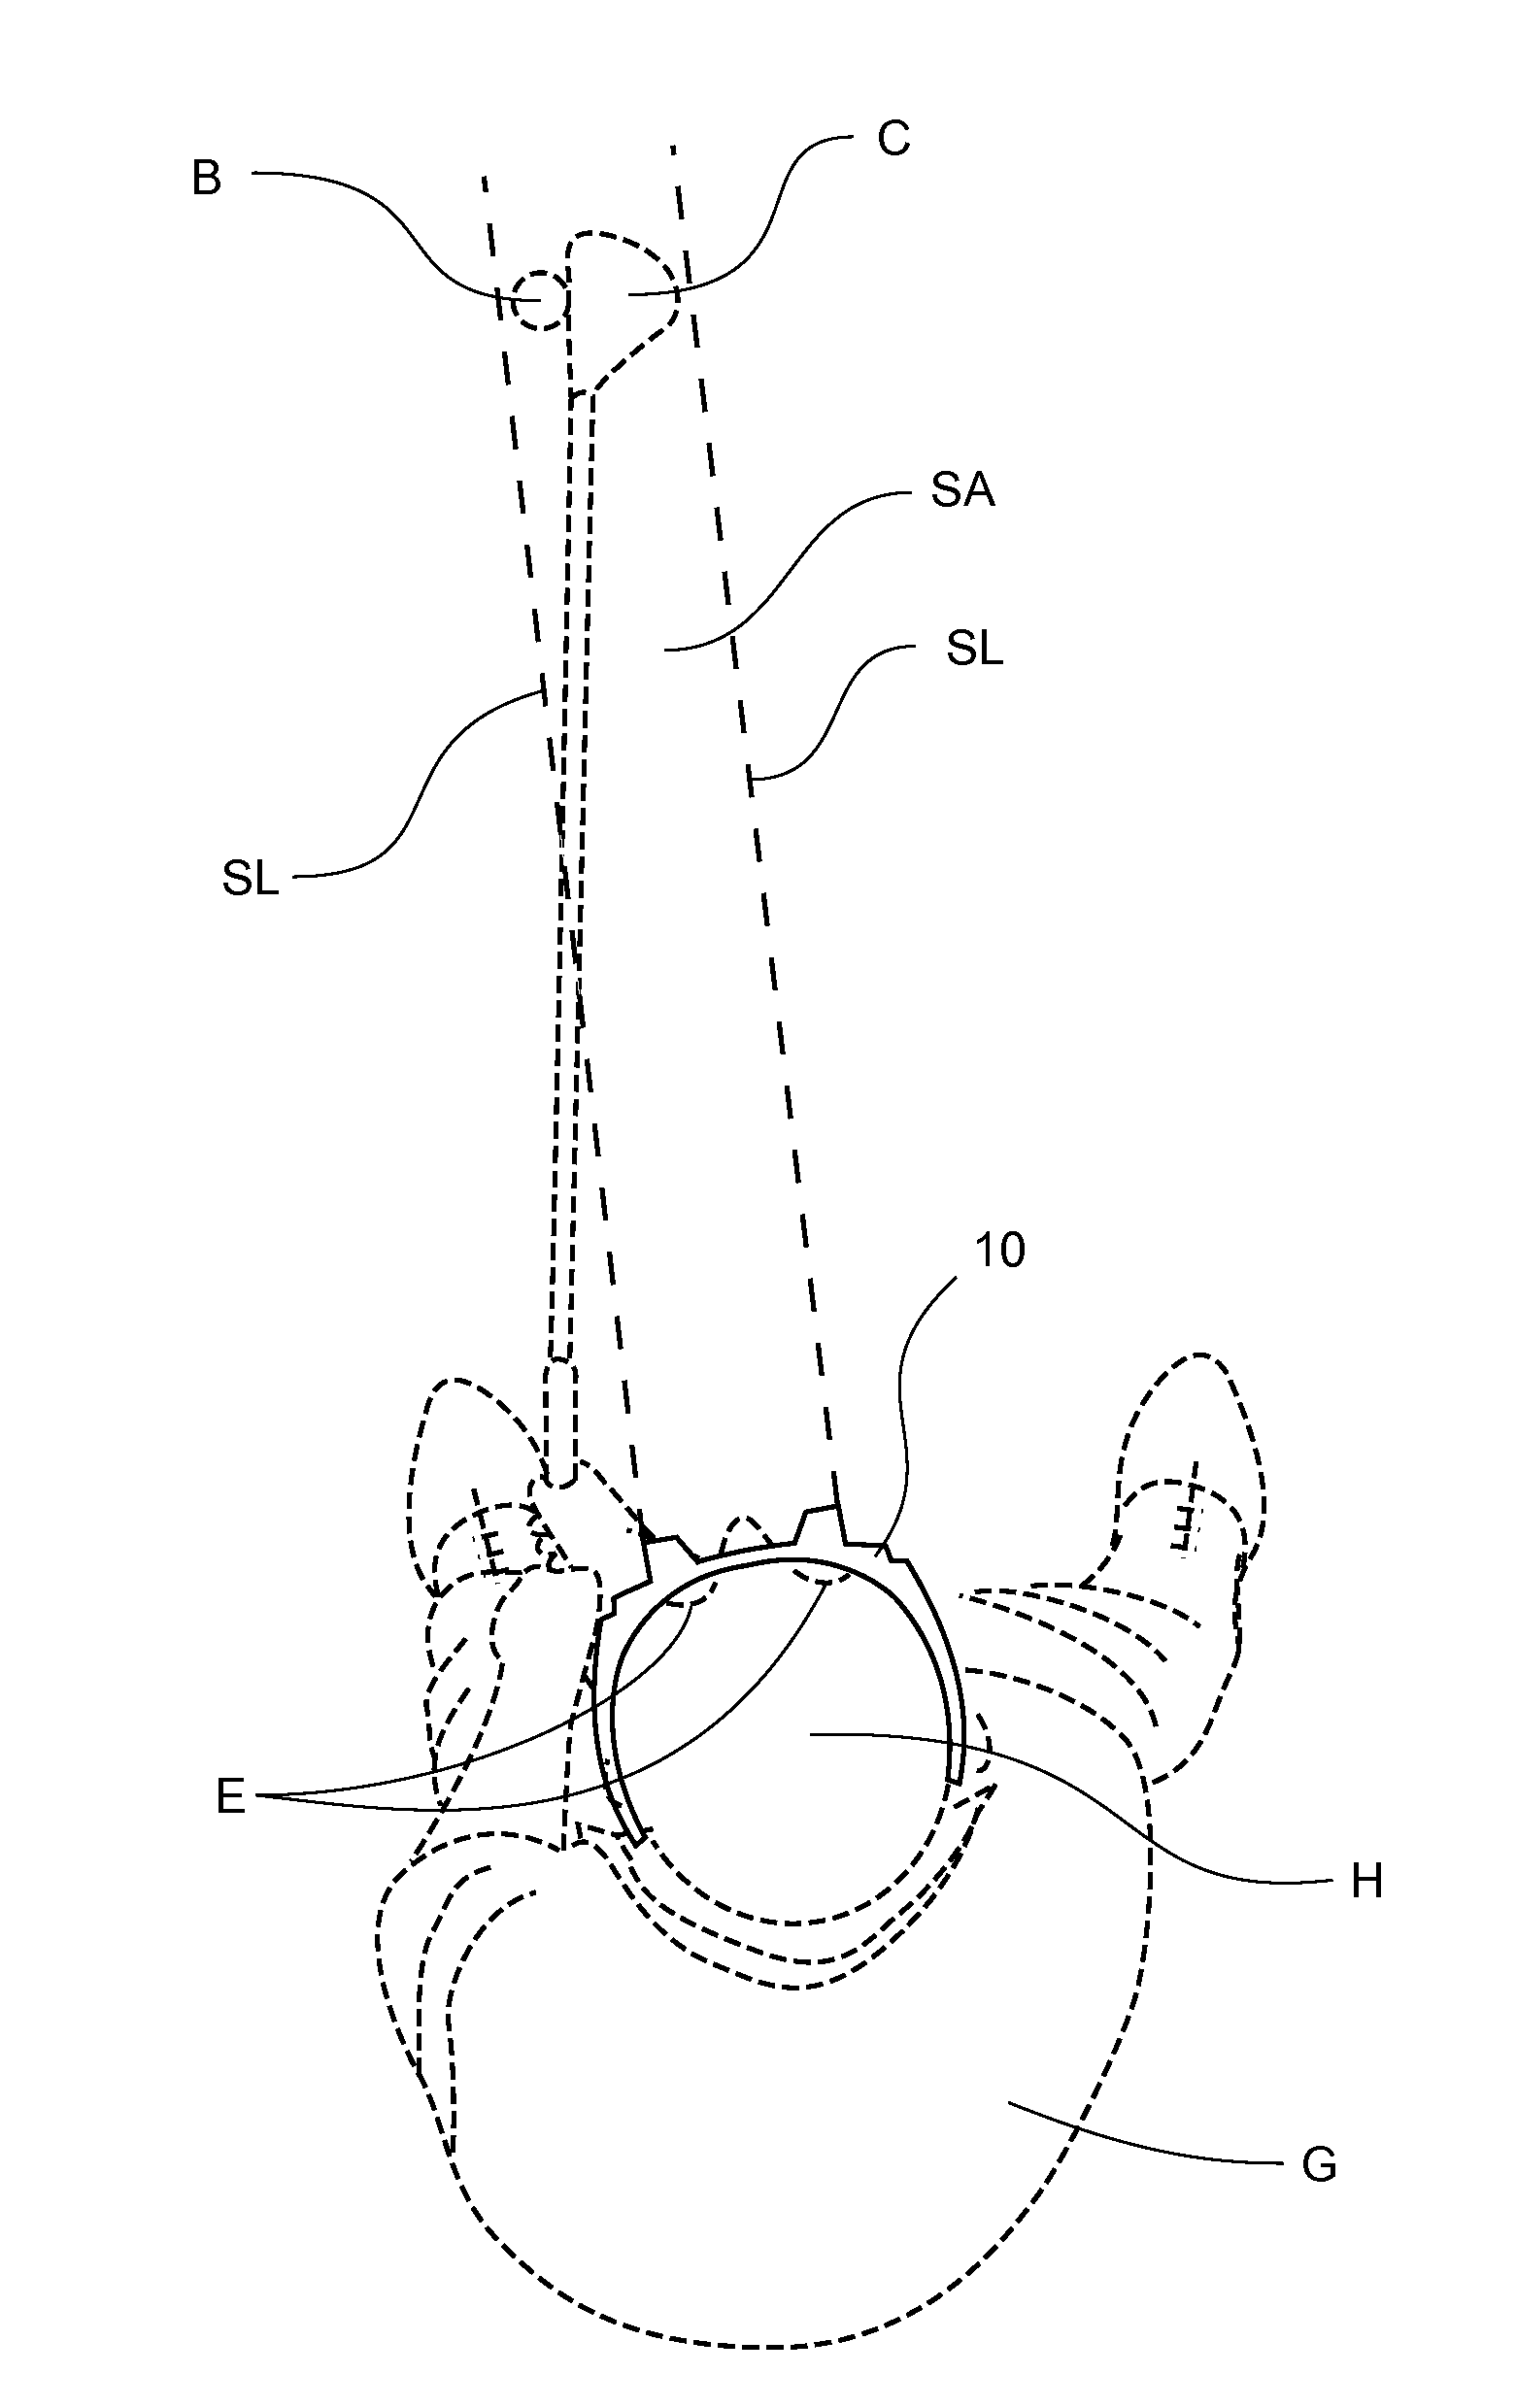 Golf Training Glasses and Method of Use Thereof